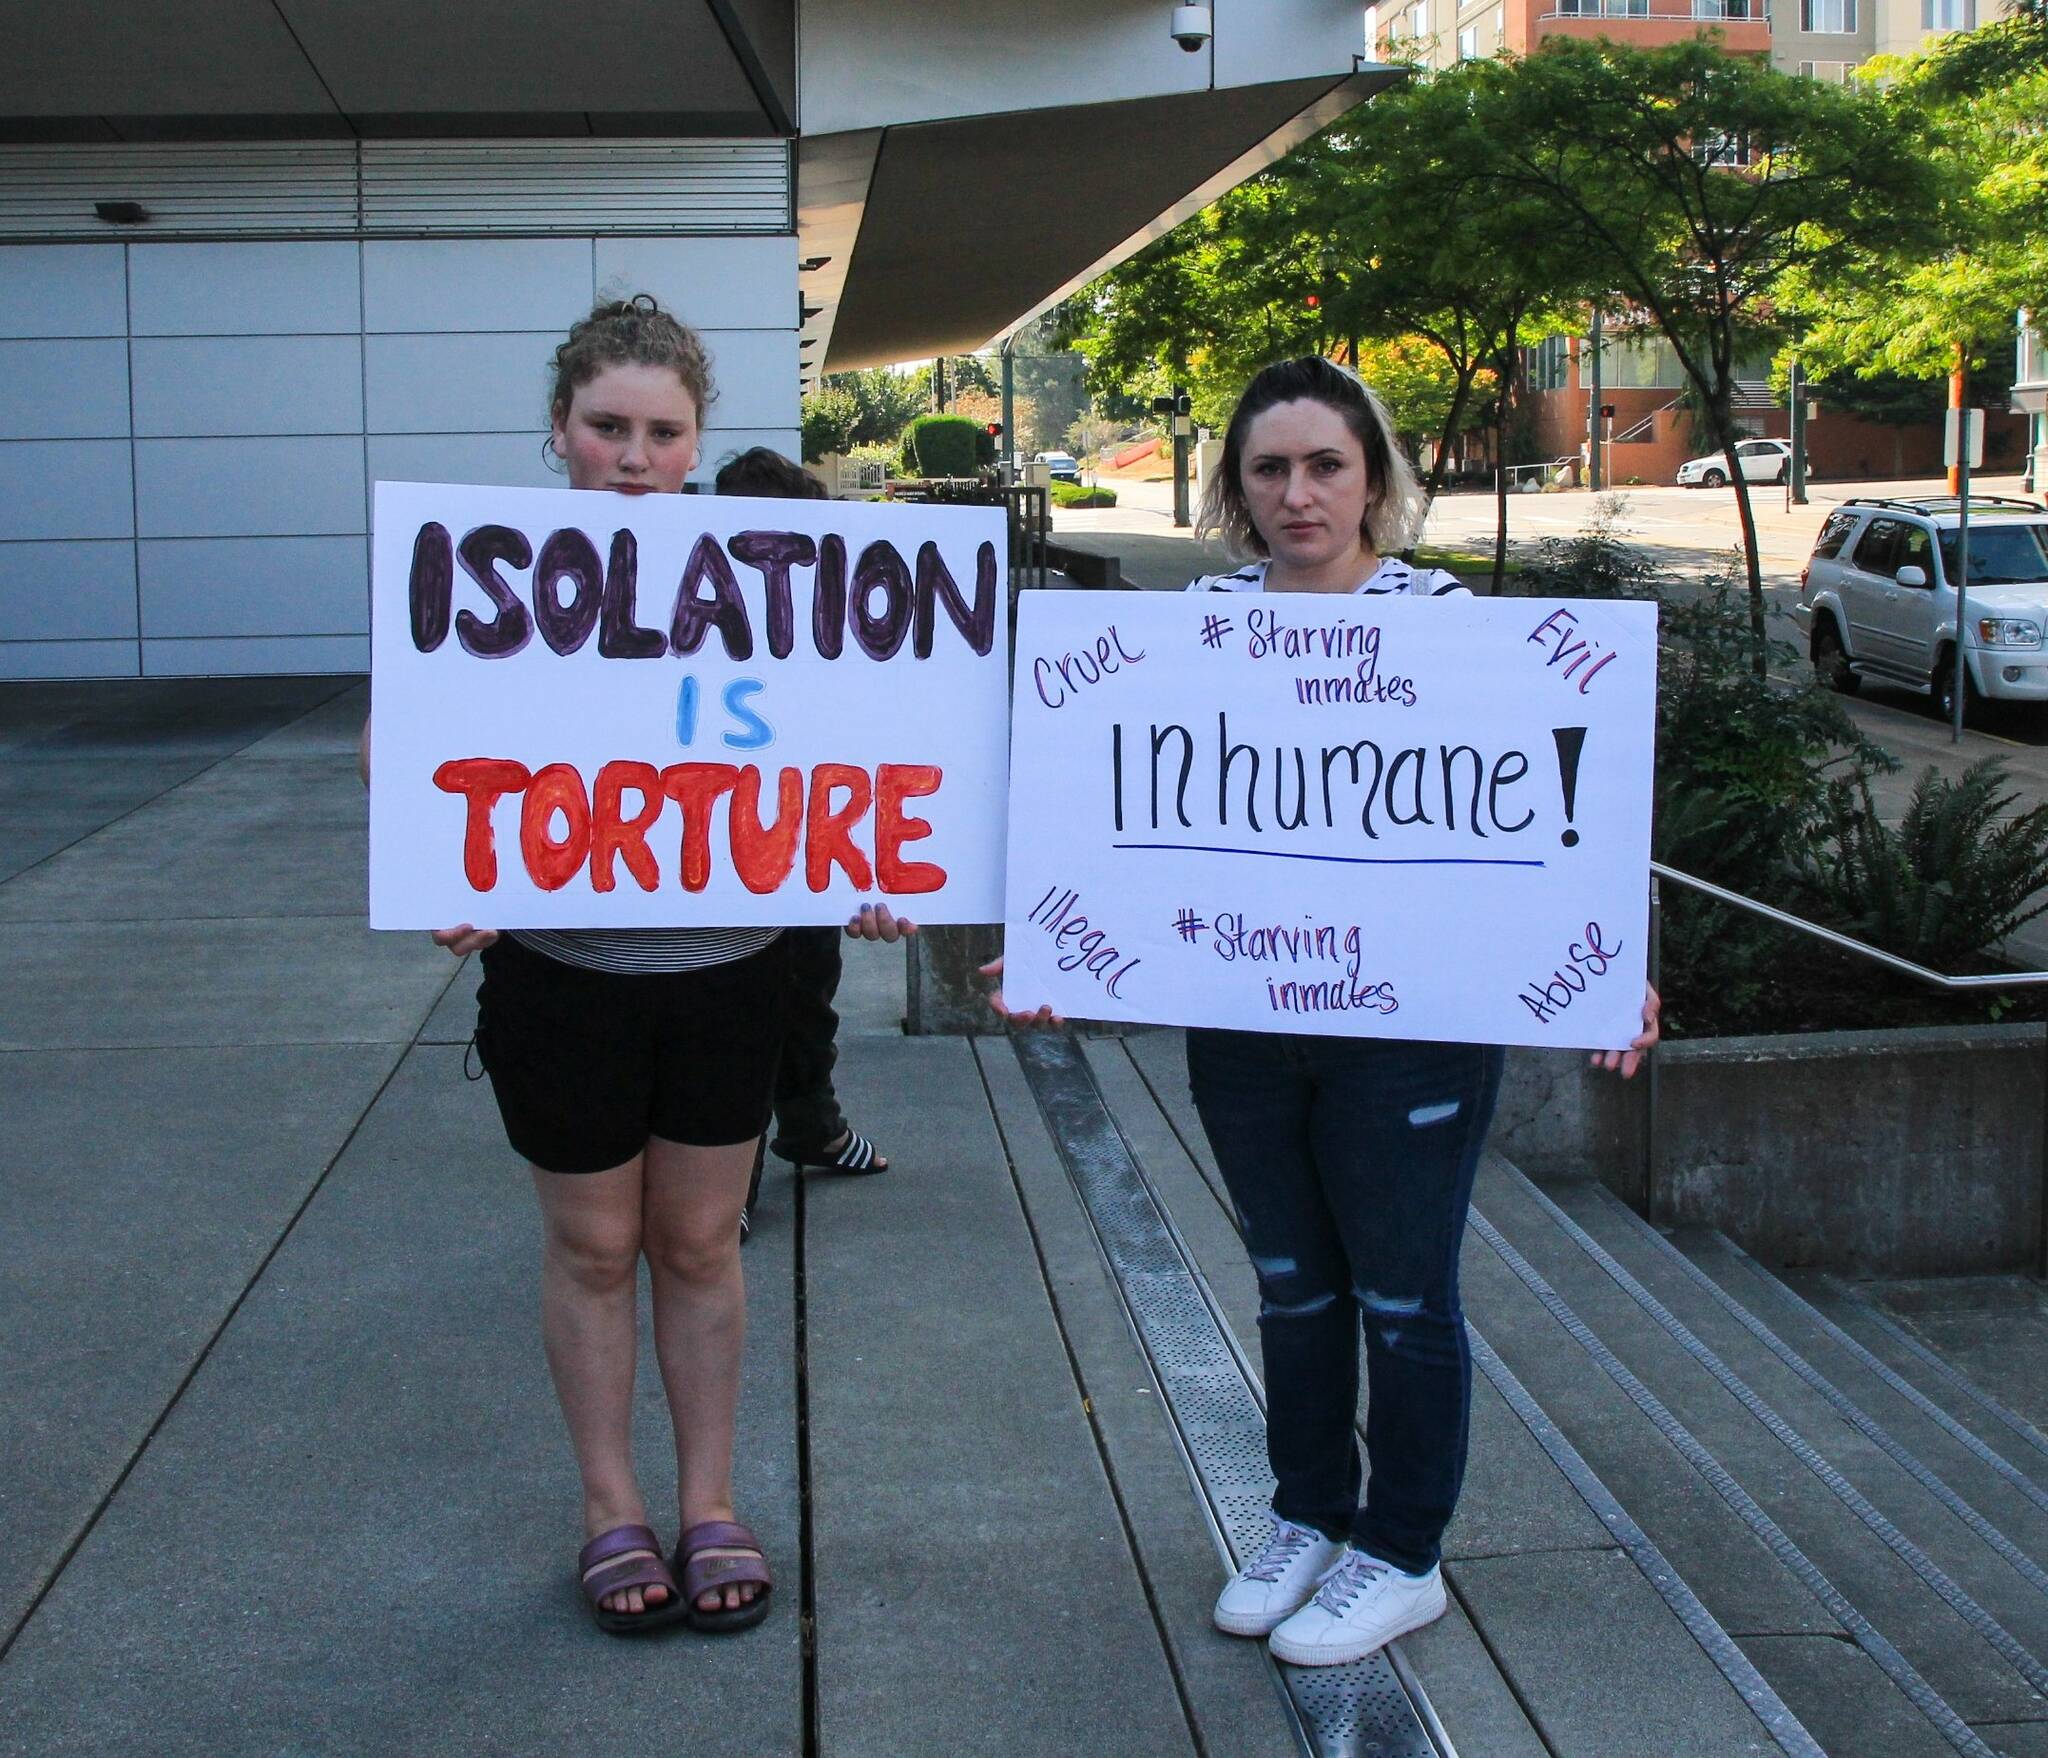 Photo by Luisa Loi/Whidbey News-Times 
Protesters stand in front of the Snohomish County Corrections building with signs.